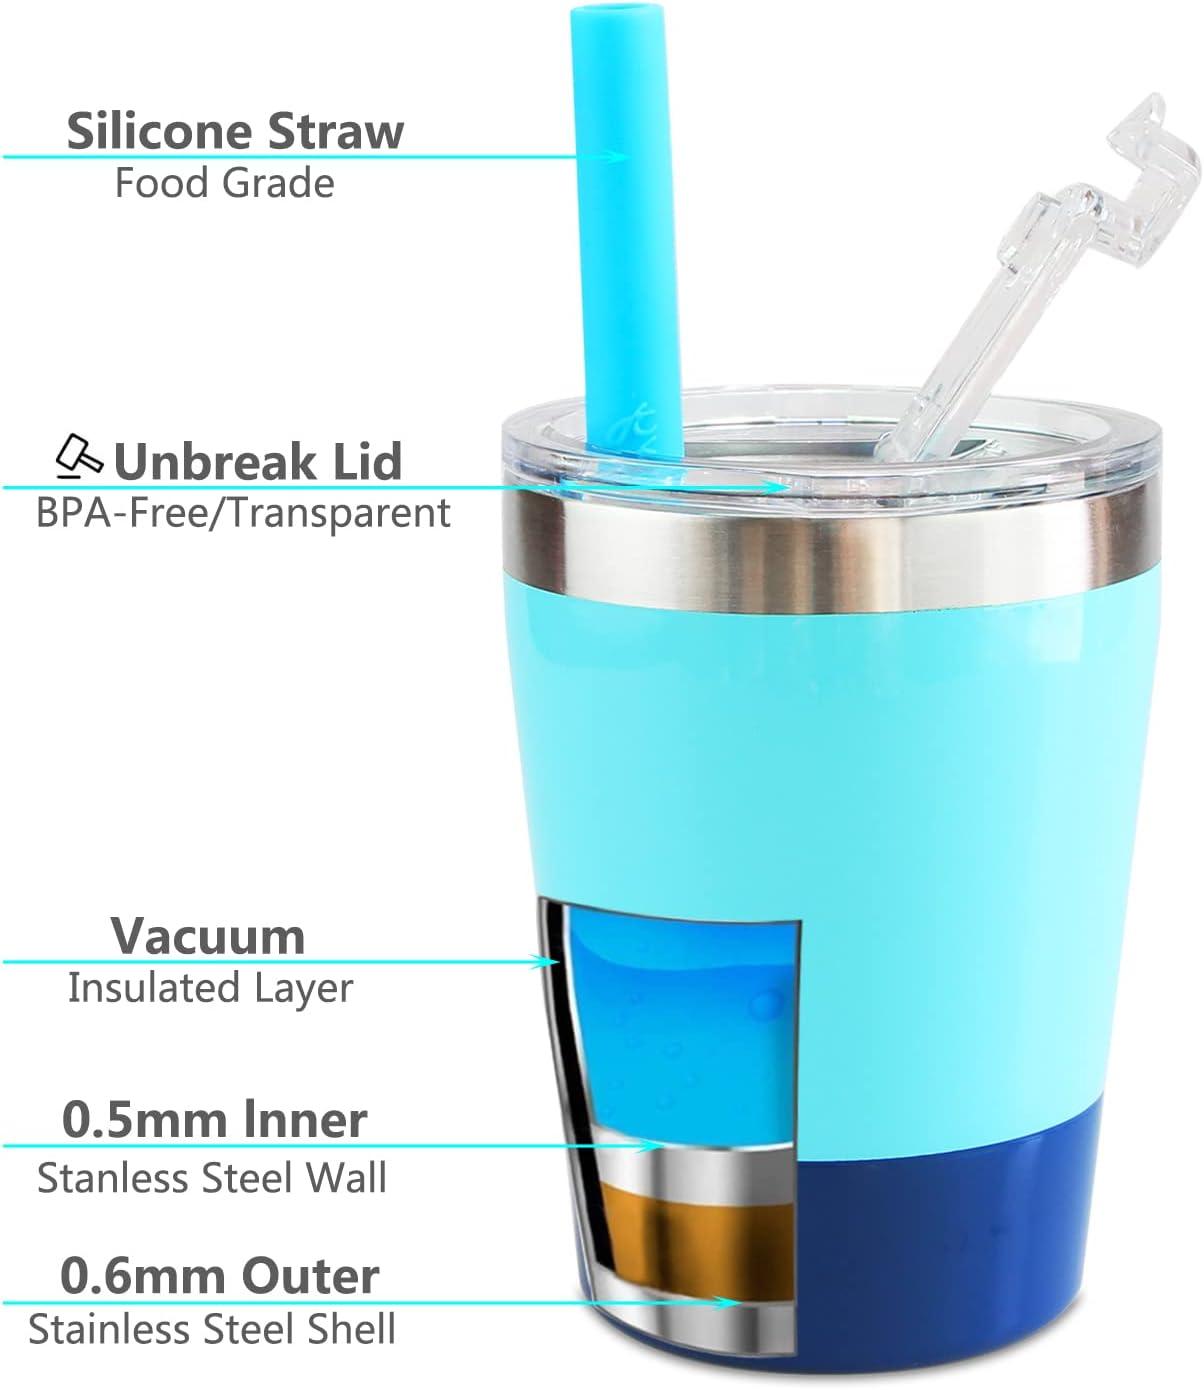 Stainless Steel Straw Cup 8.5 fl. oz. mineral grey